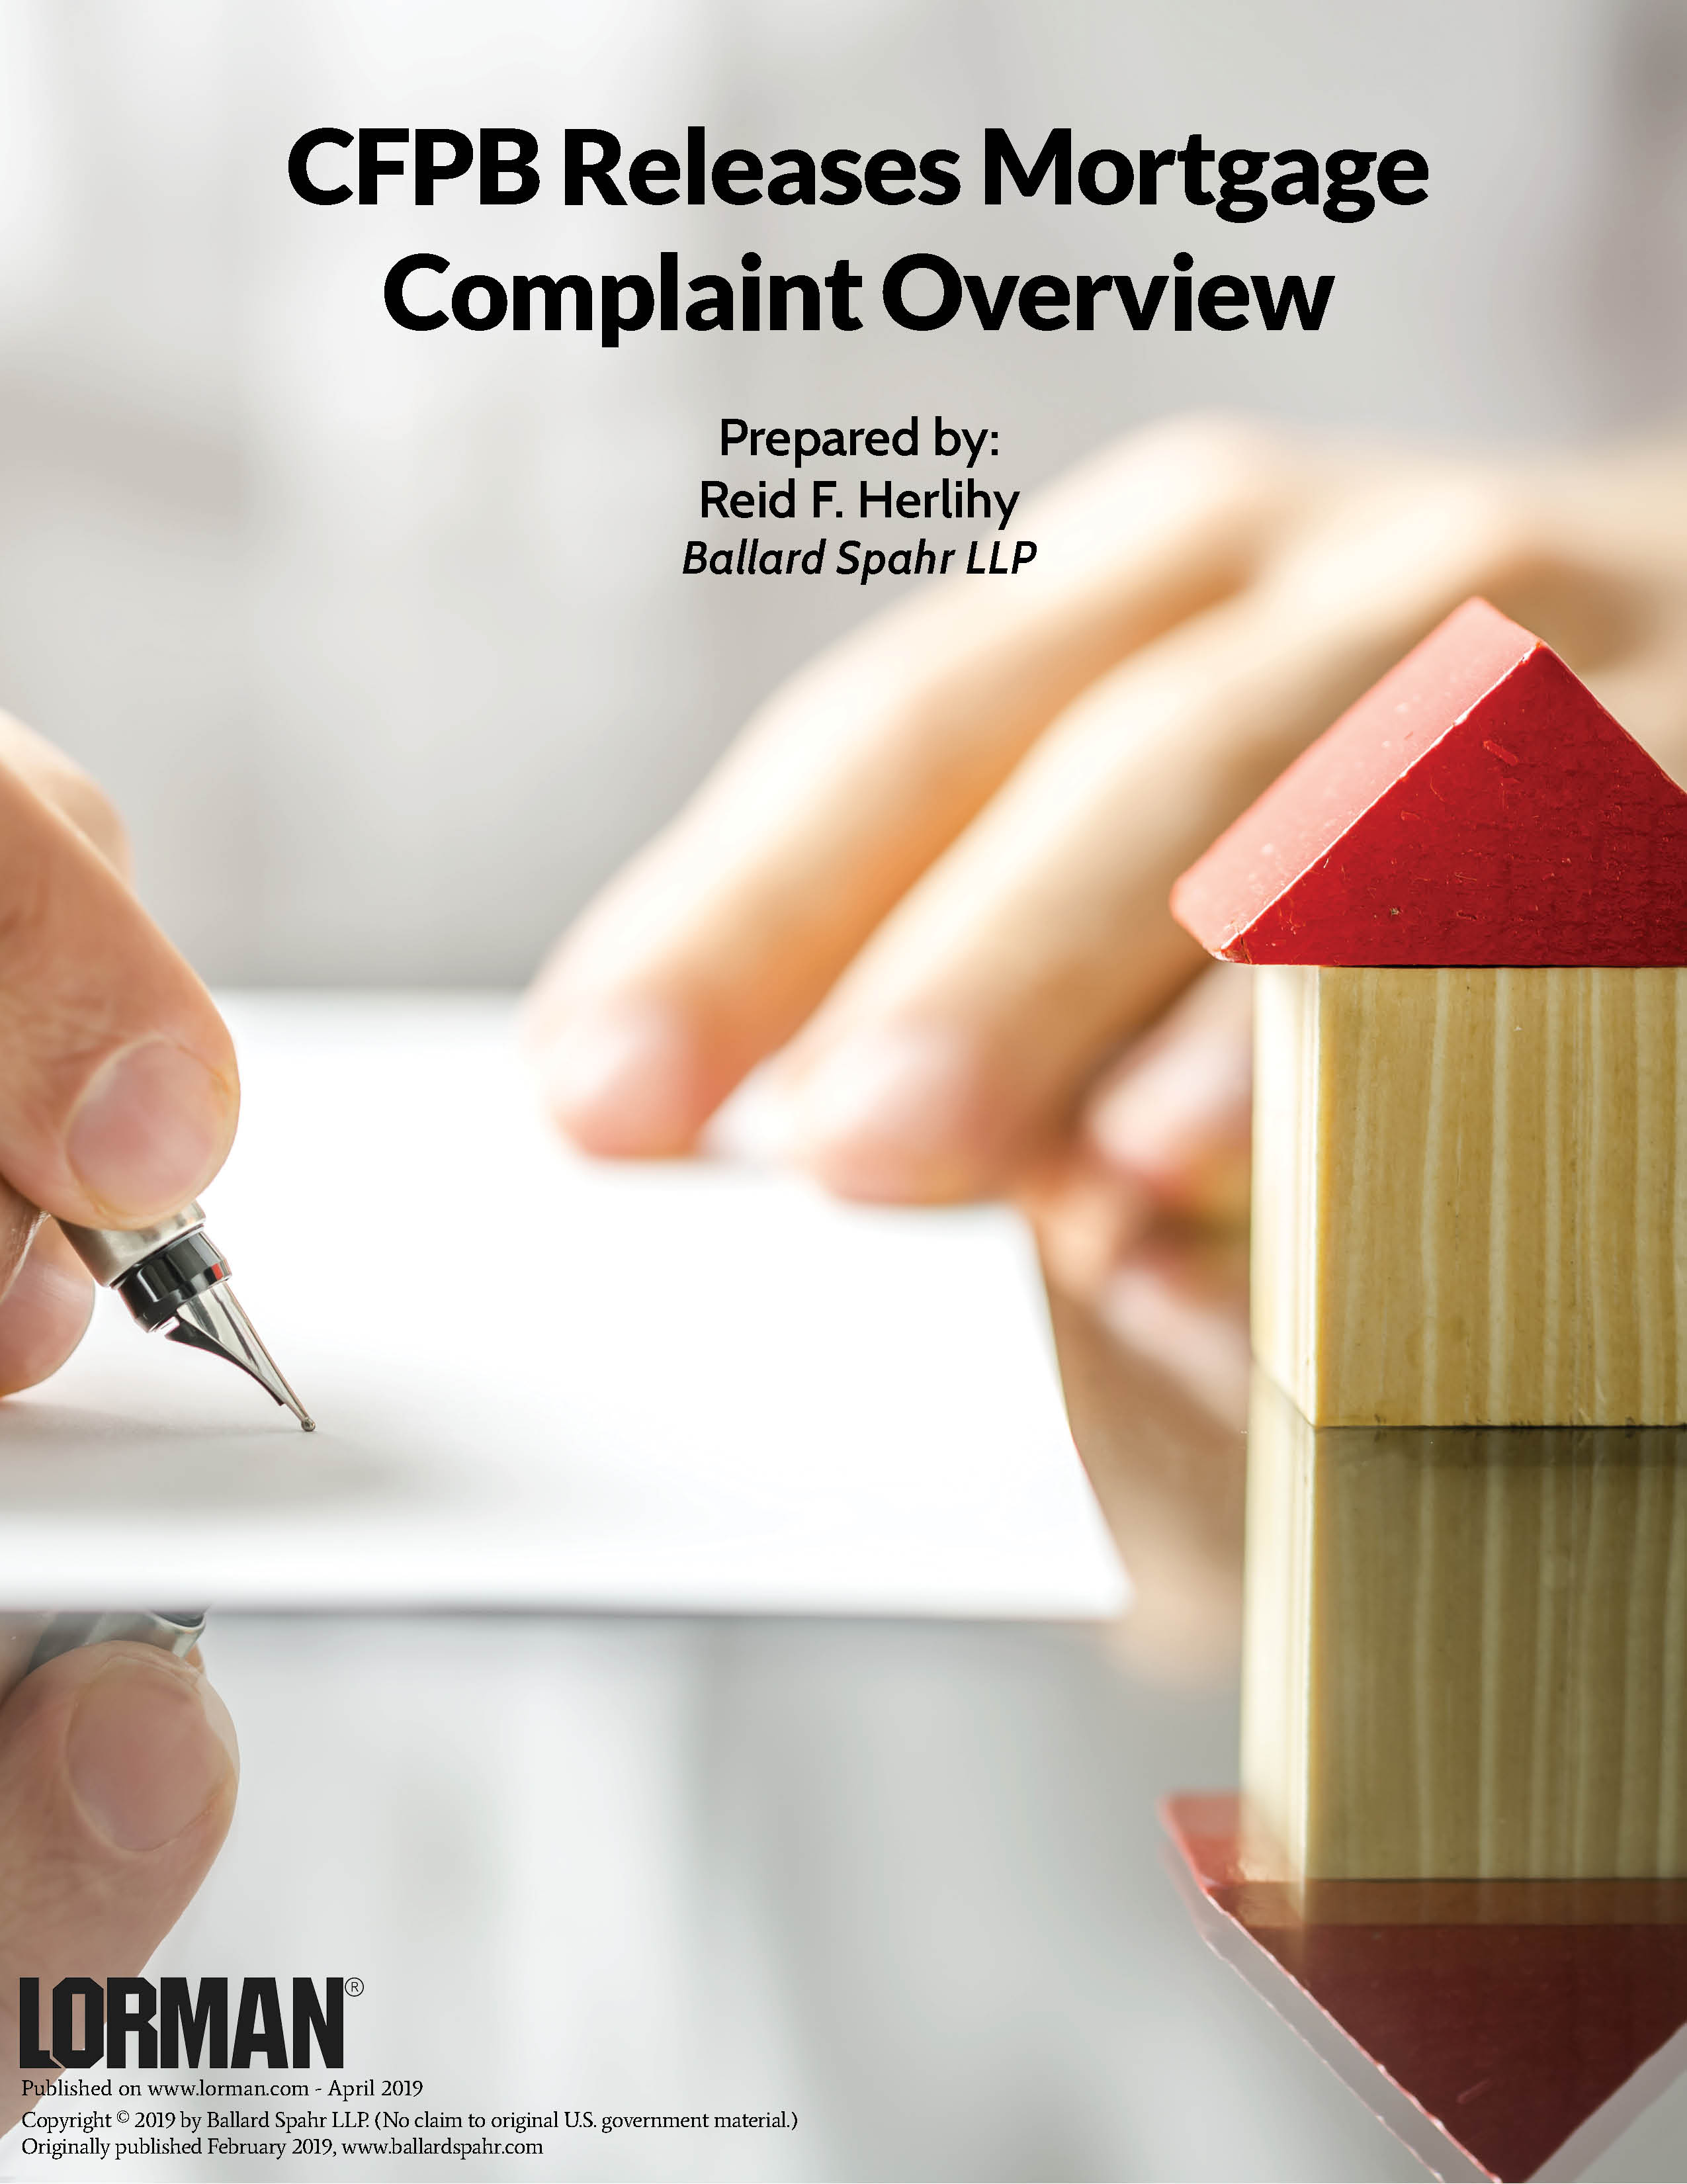 CFPB Releases Mortgage Complaint Overview